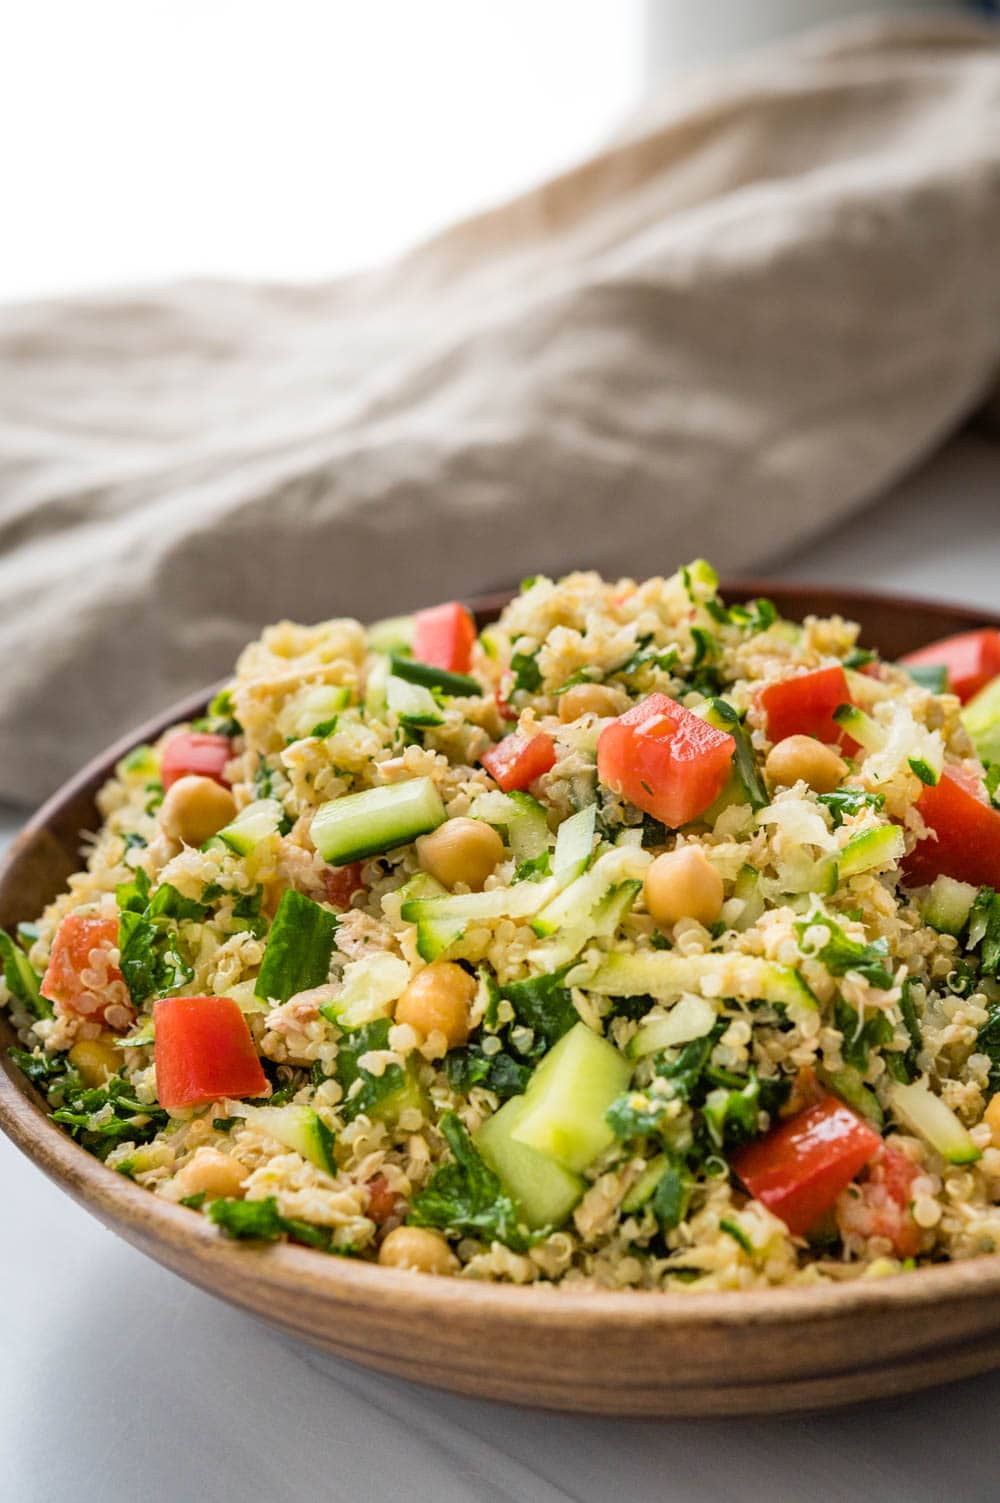 A large bowl of freshly made chickpea tuna salad with quinoa and kale.